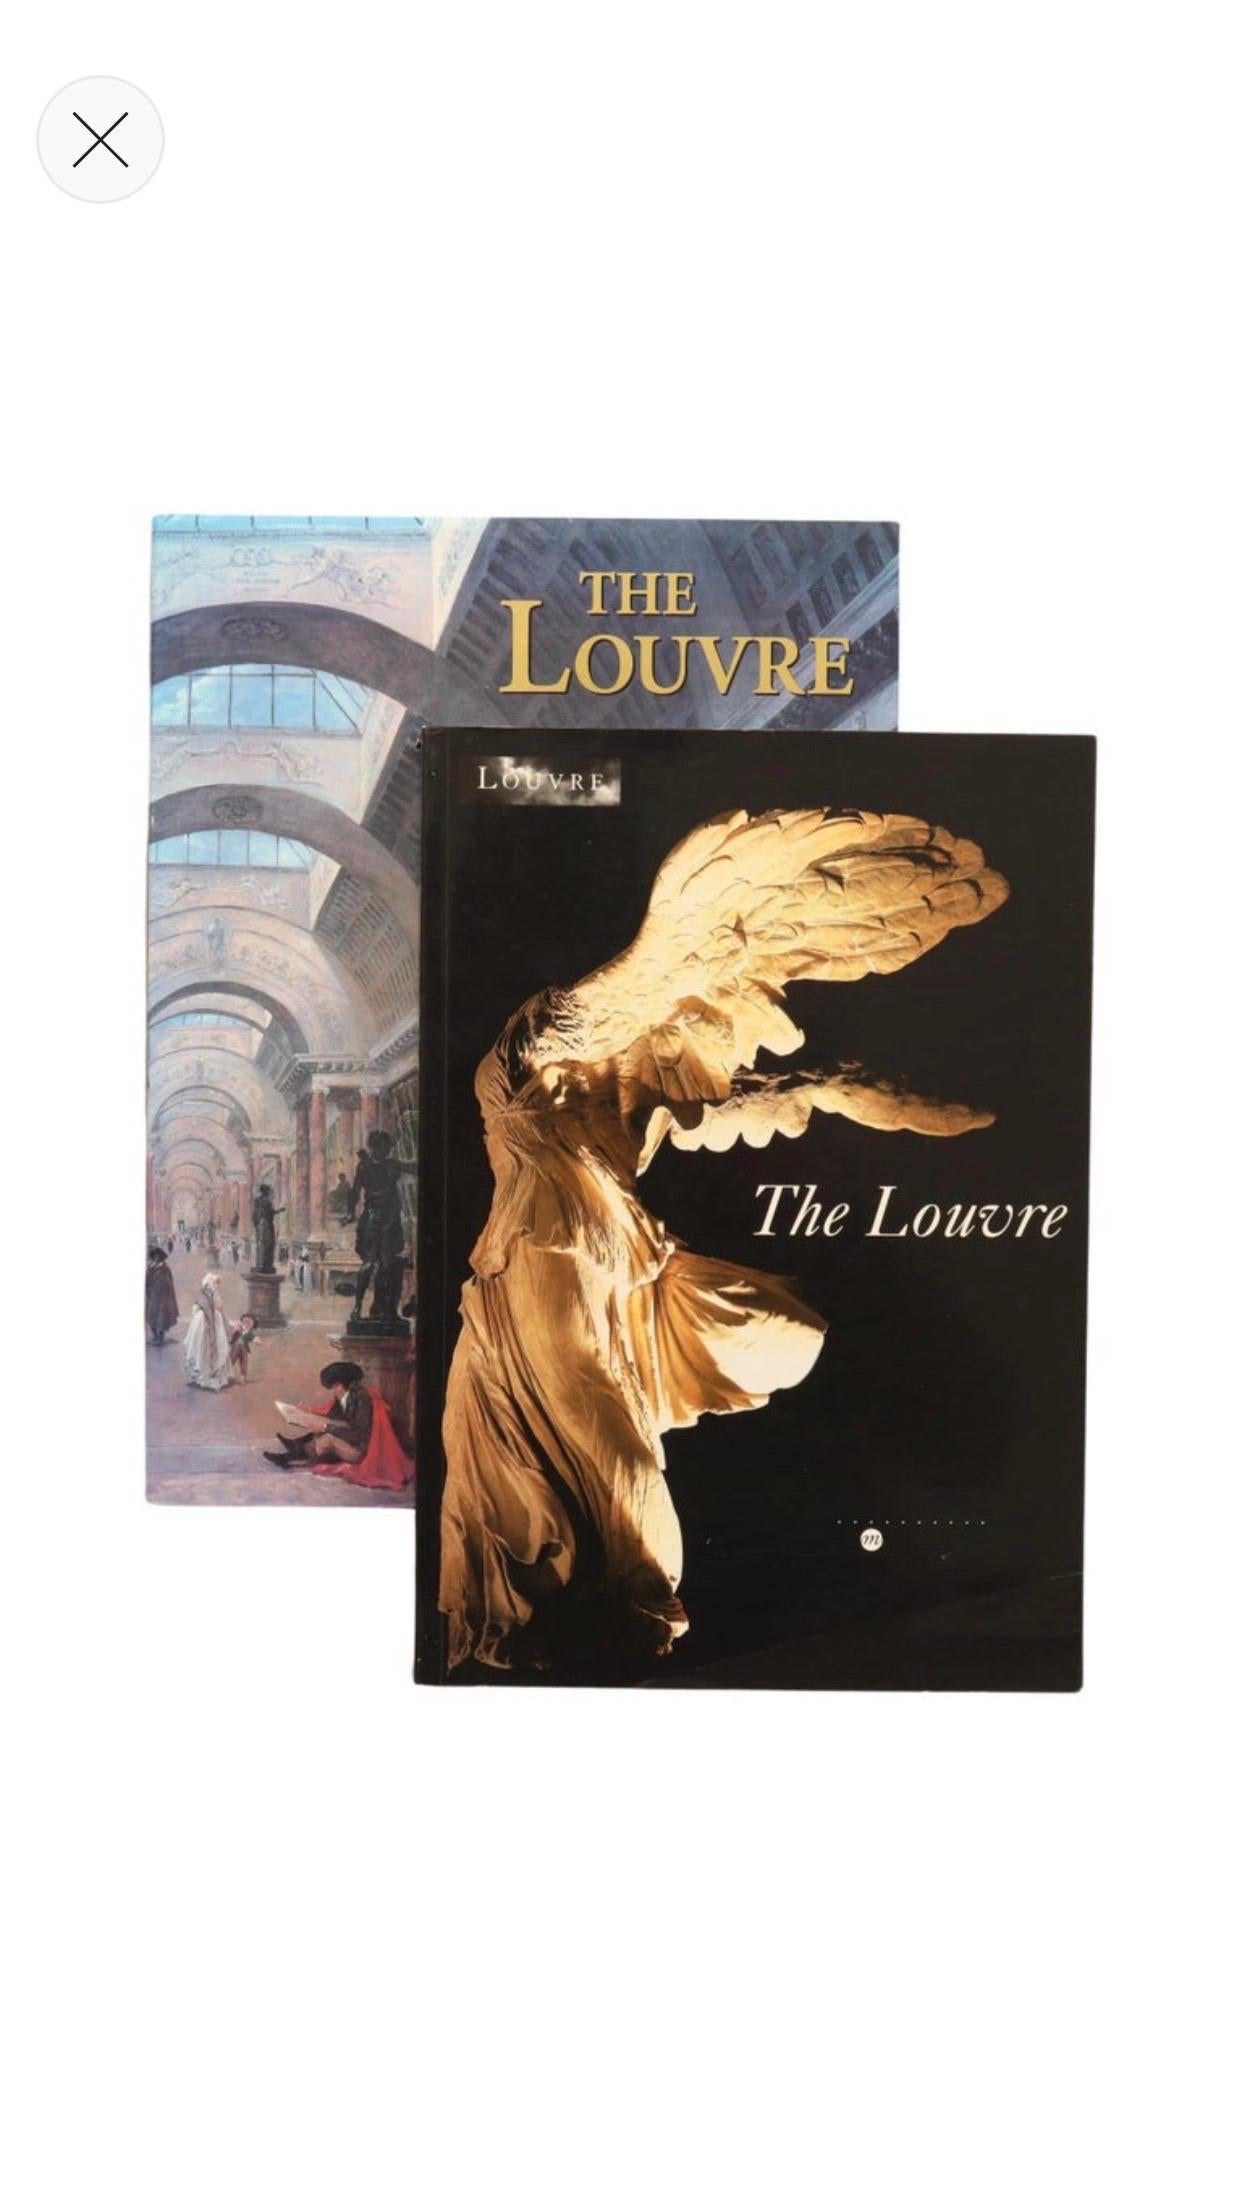 A set of two books on The Louvre. One hardcover book with dustjacket, published by Barnes and Noble in 2003, 320 pages. One softcover book, published in 1996 by Reunion des Musees Nationaux in 1996, 406 pages.